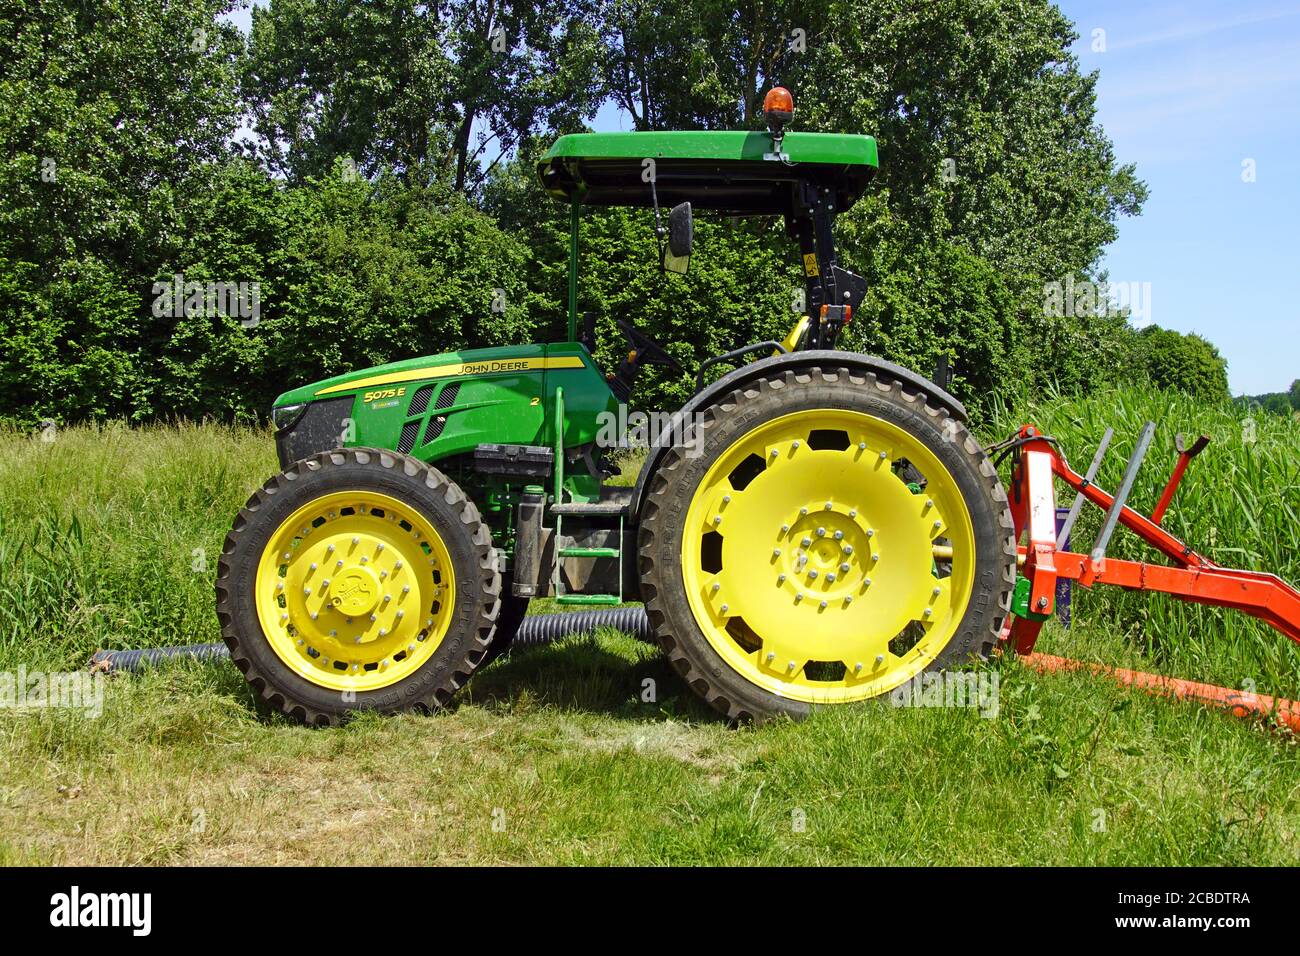 Almere, the Netherland - June 1, 2020: John Deere 5075 e standing on a field. Stock Photo